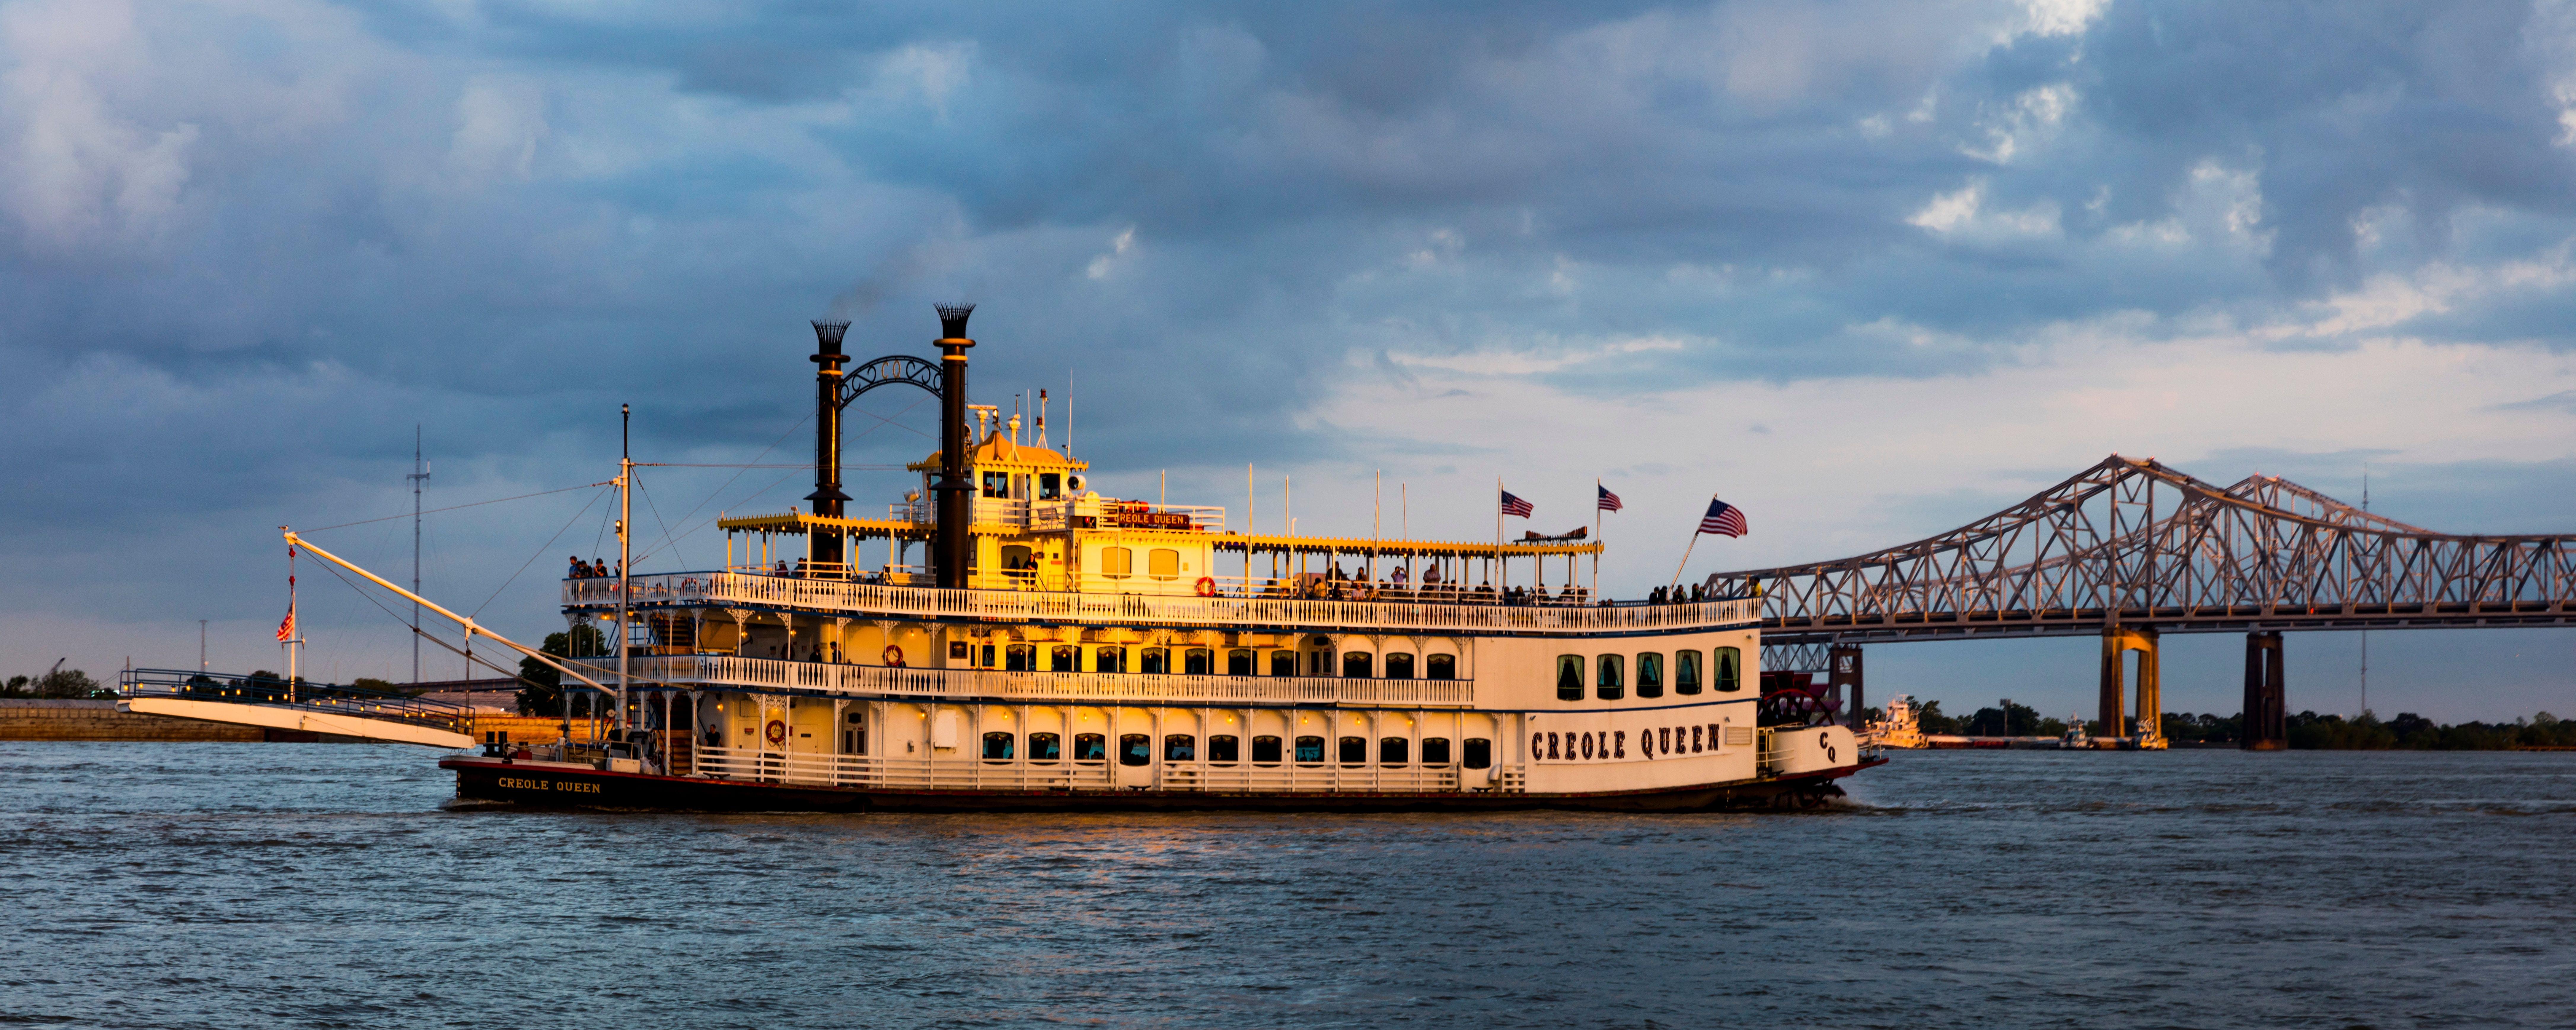 Creole Queen History Cruise